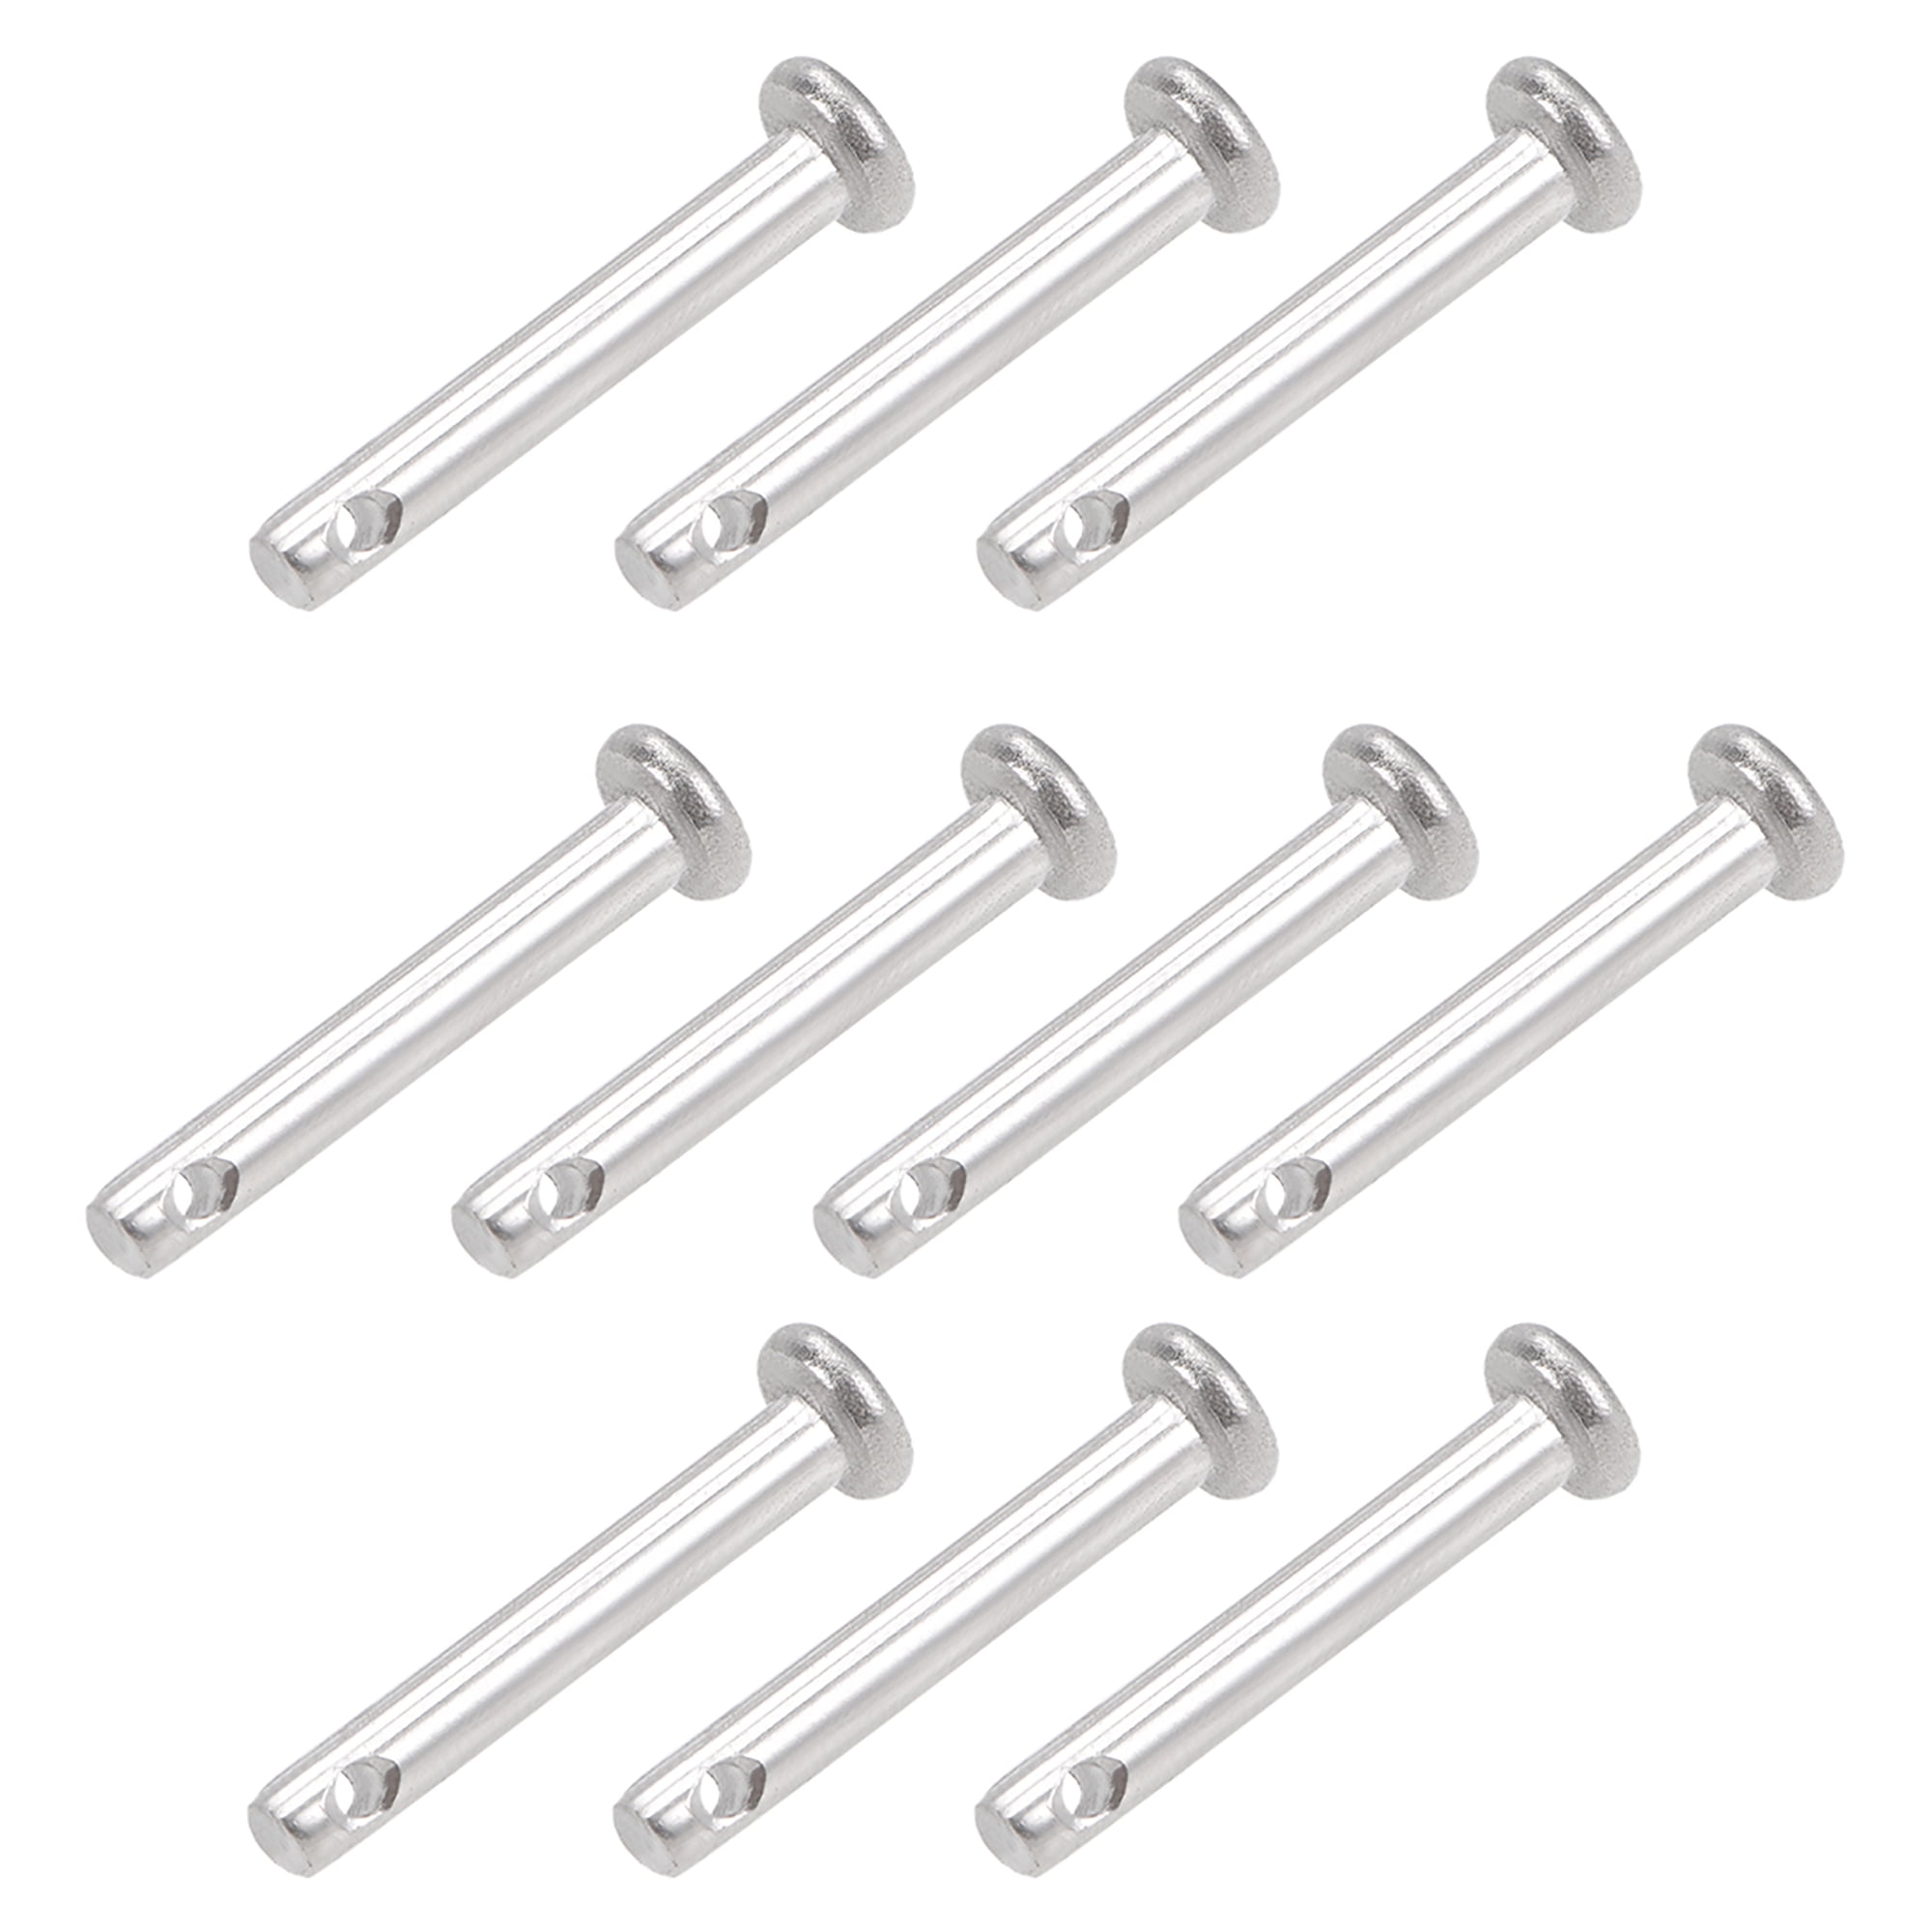 Single Hole Clevis Pins - 3mm x 20mm Flat Head 304 Stainless Steel Link ...